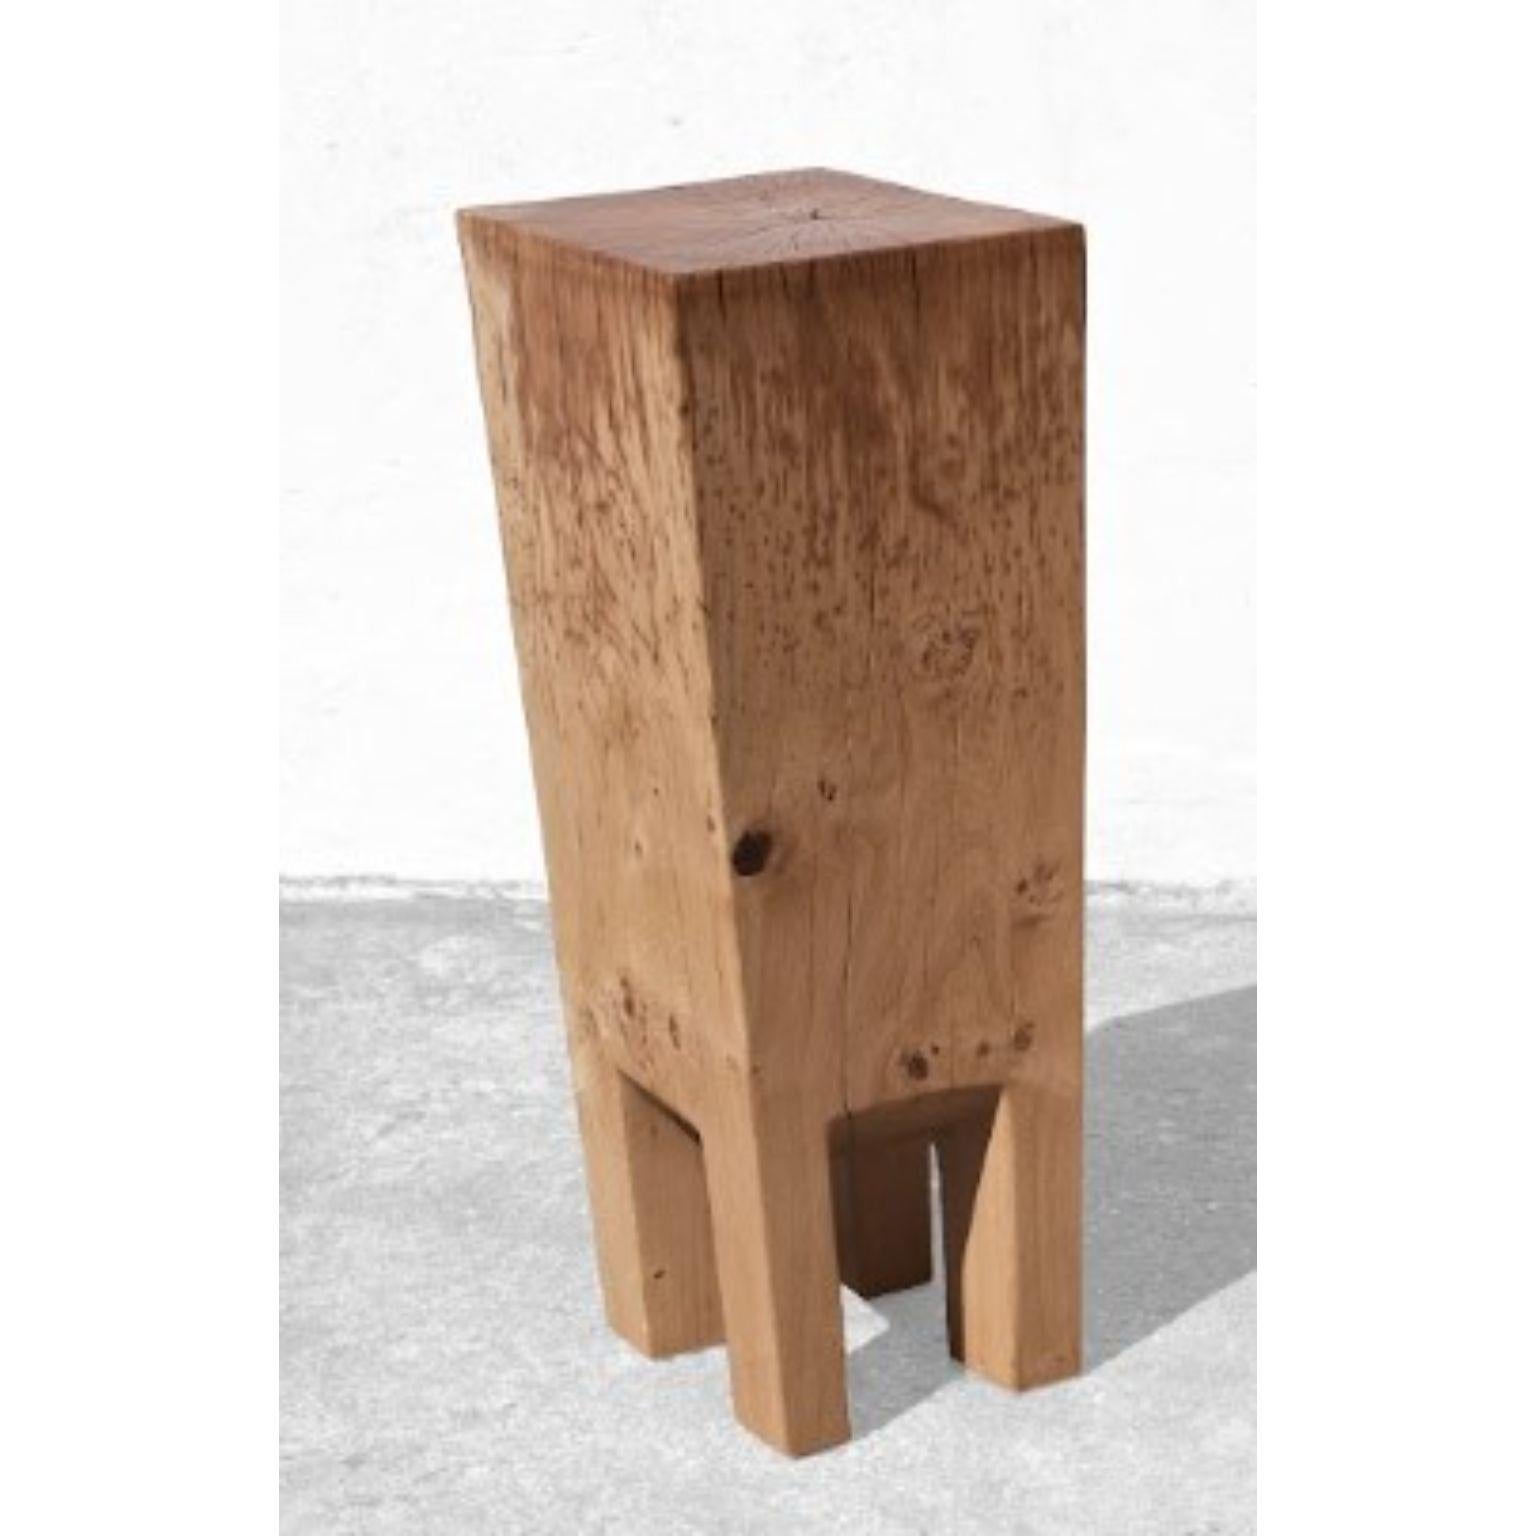 Sculpted side table by Jörg Pietschmann
Dimensions: H 86 x W 34 x D 33 cm 

In Pietschmann’s sculptures, trees that for centuries were part of a landscape and founded in primordial forces tell stories inscribed in the memory of their fibers.

The